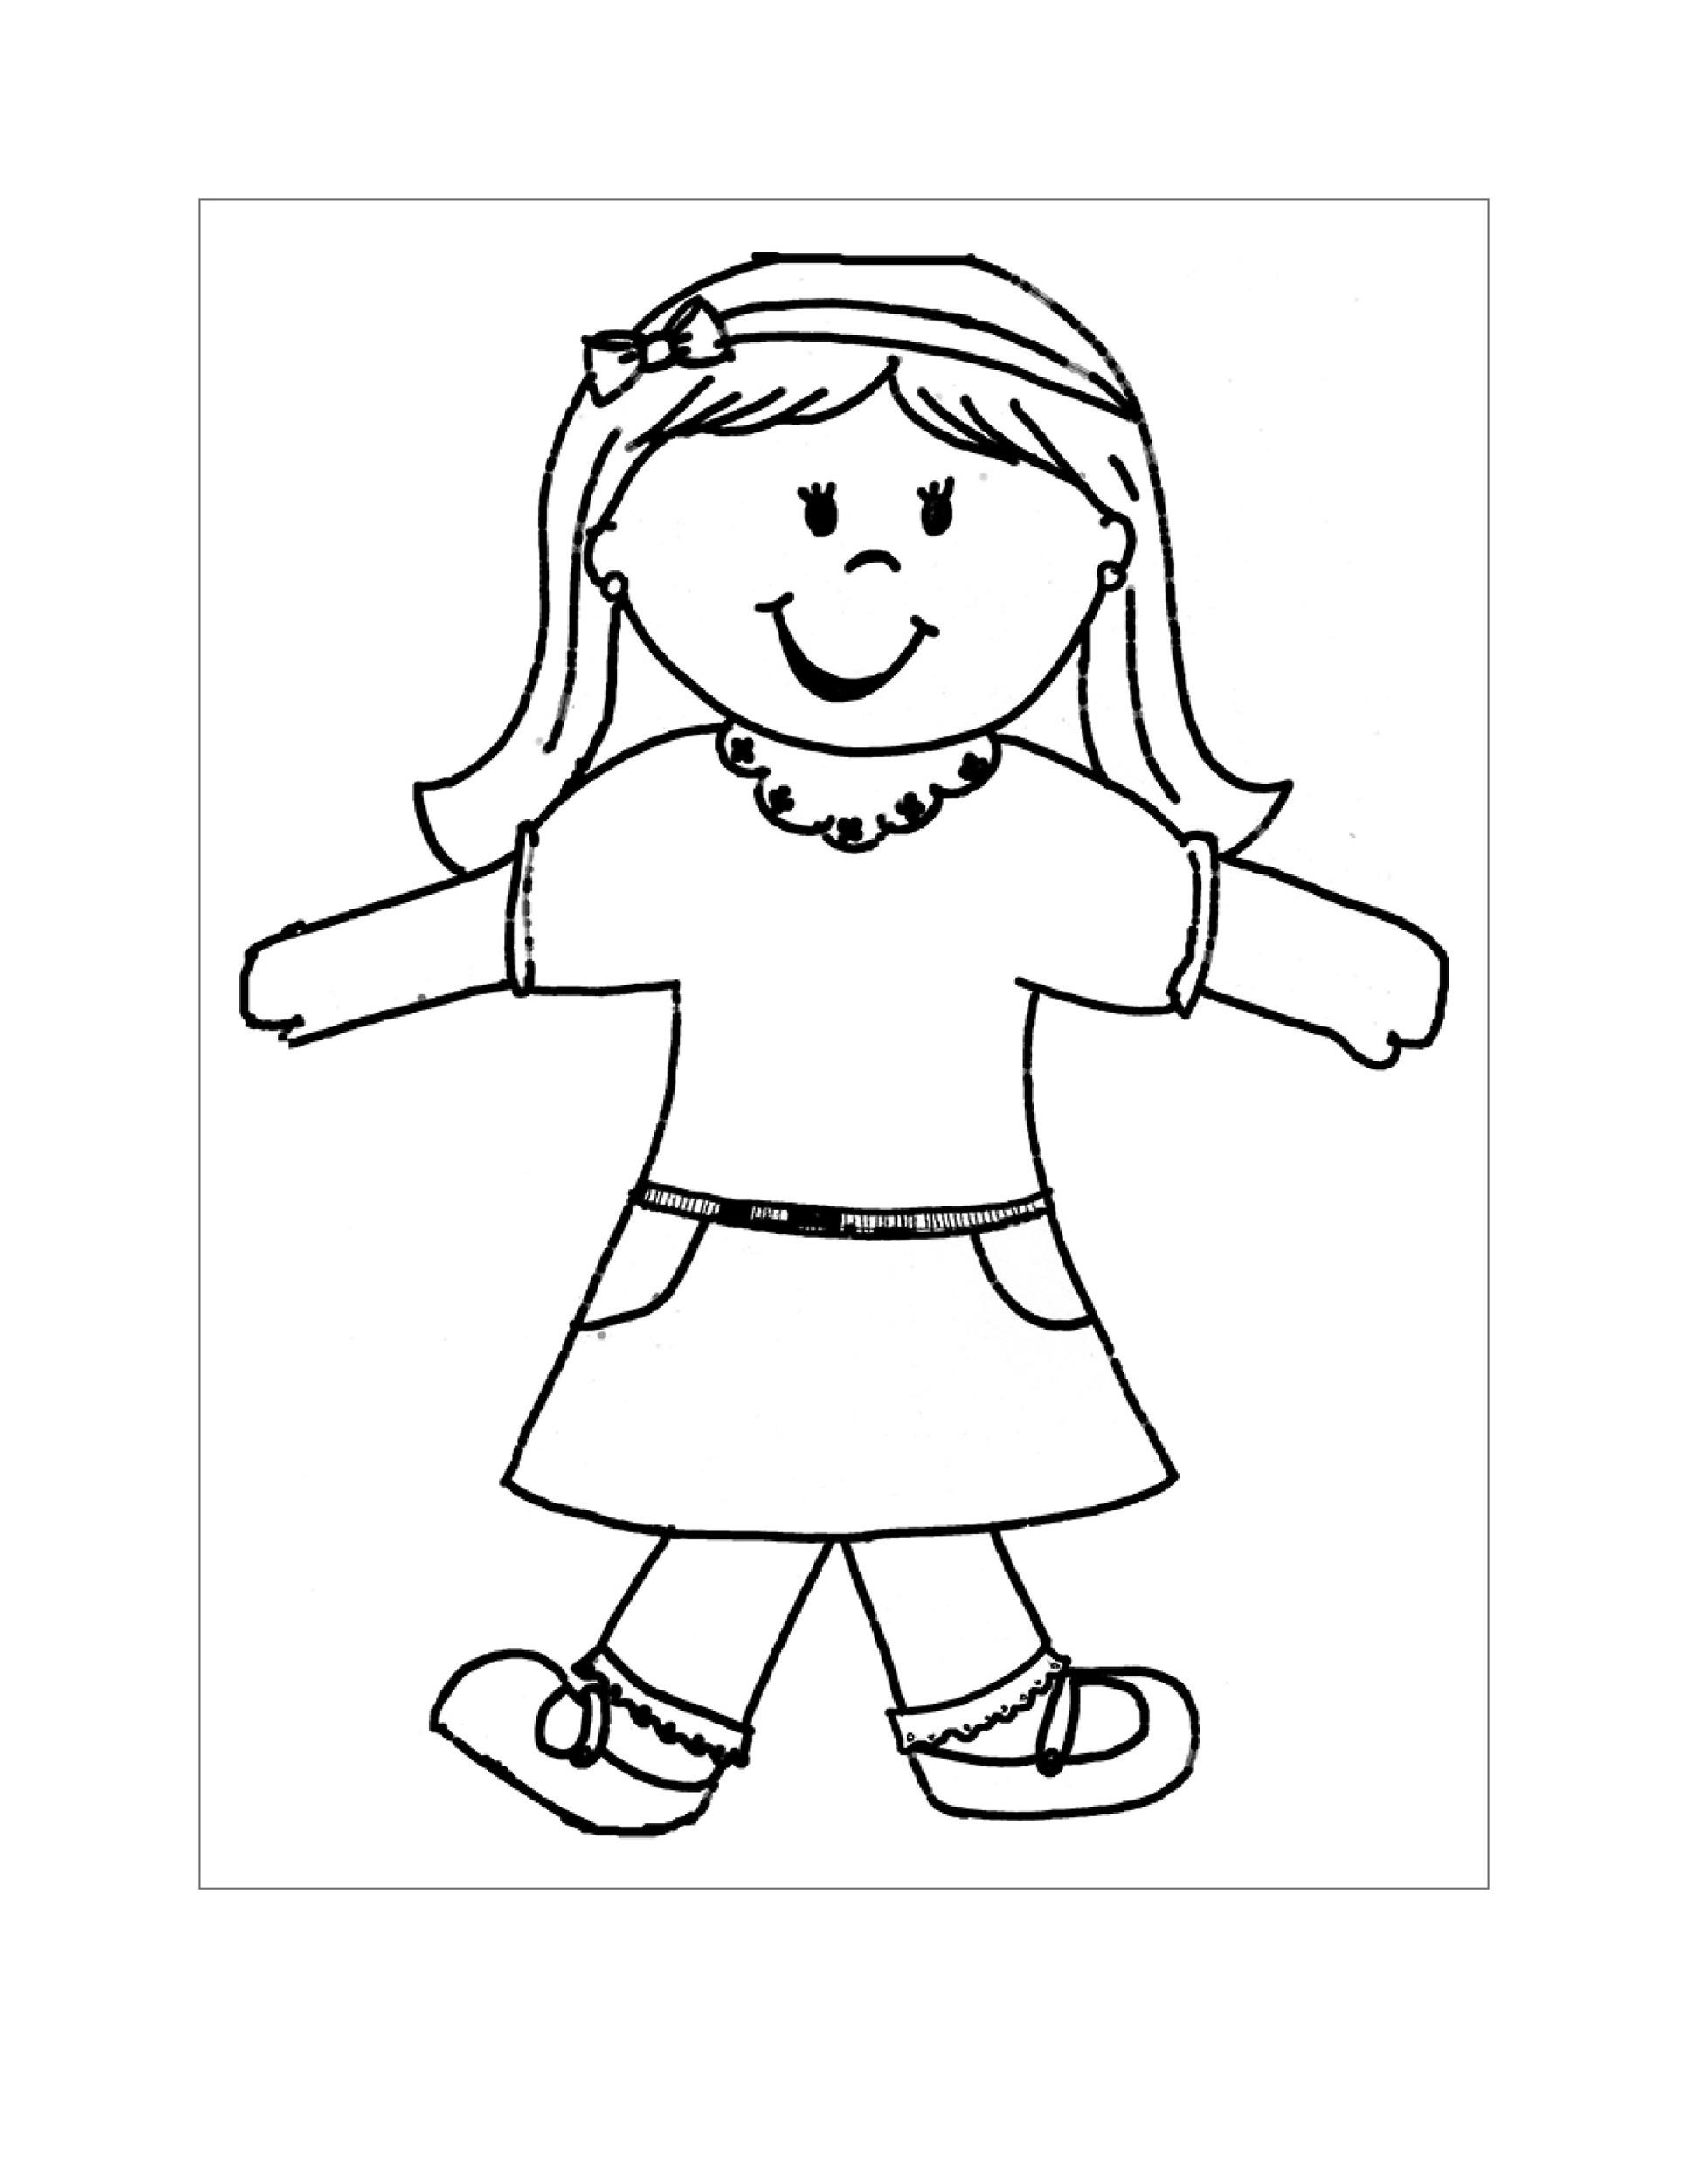 37 Flat Stanley Templates & Letter Examples ᐅ Template Lab